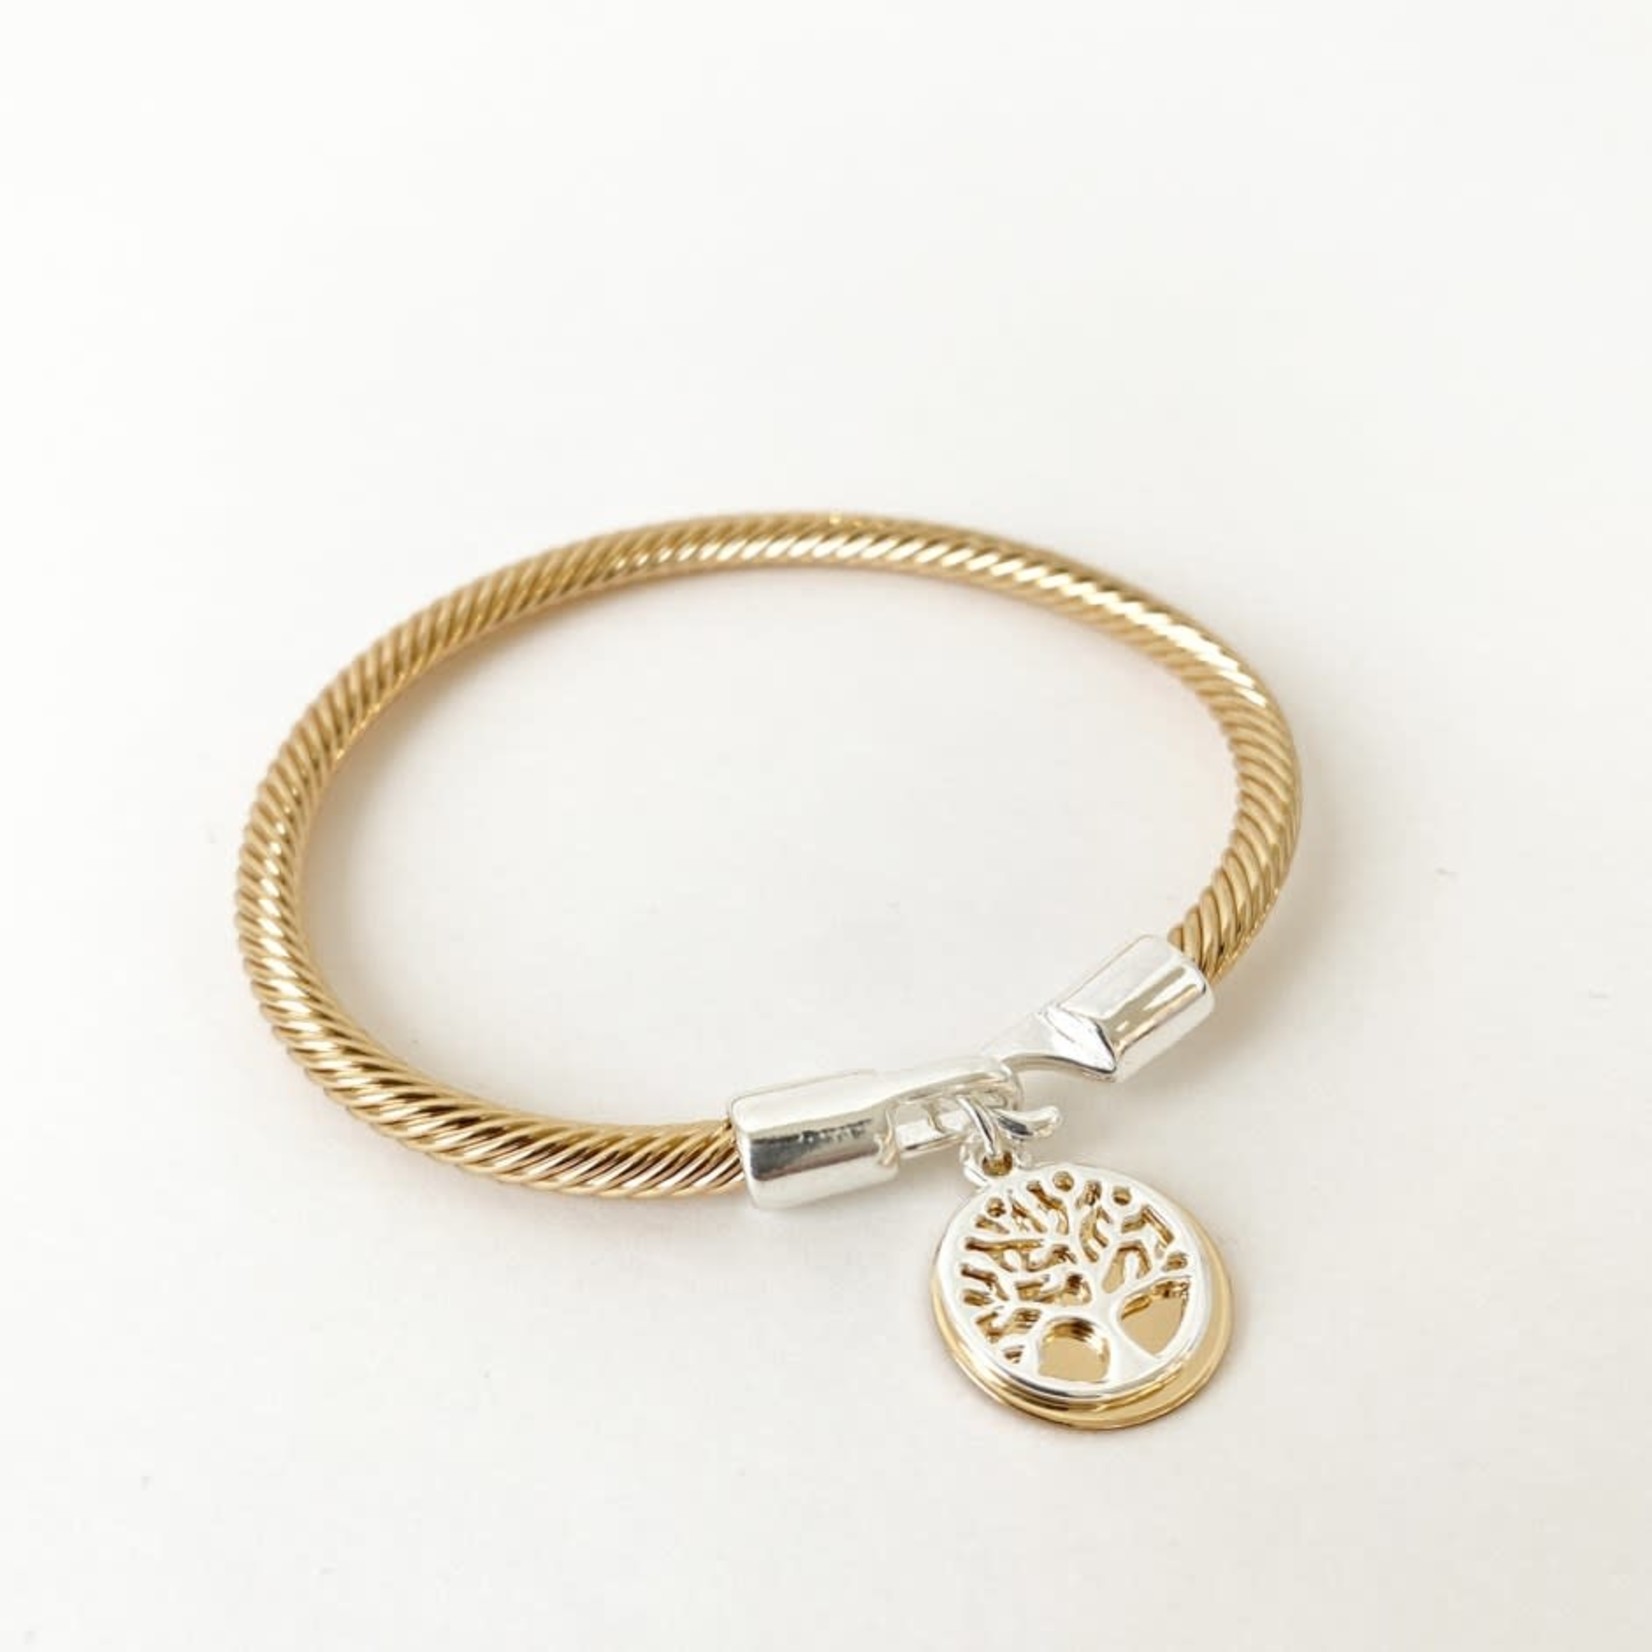 Silver & Rose Gold Bracelet with Tree Charm